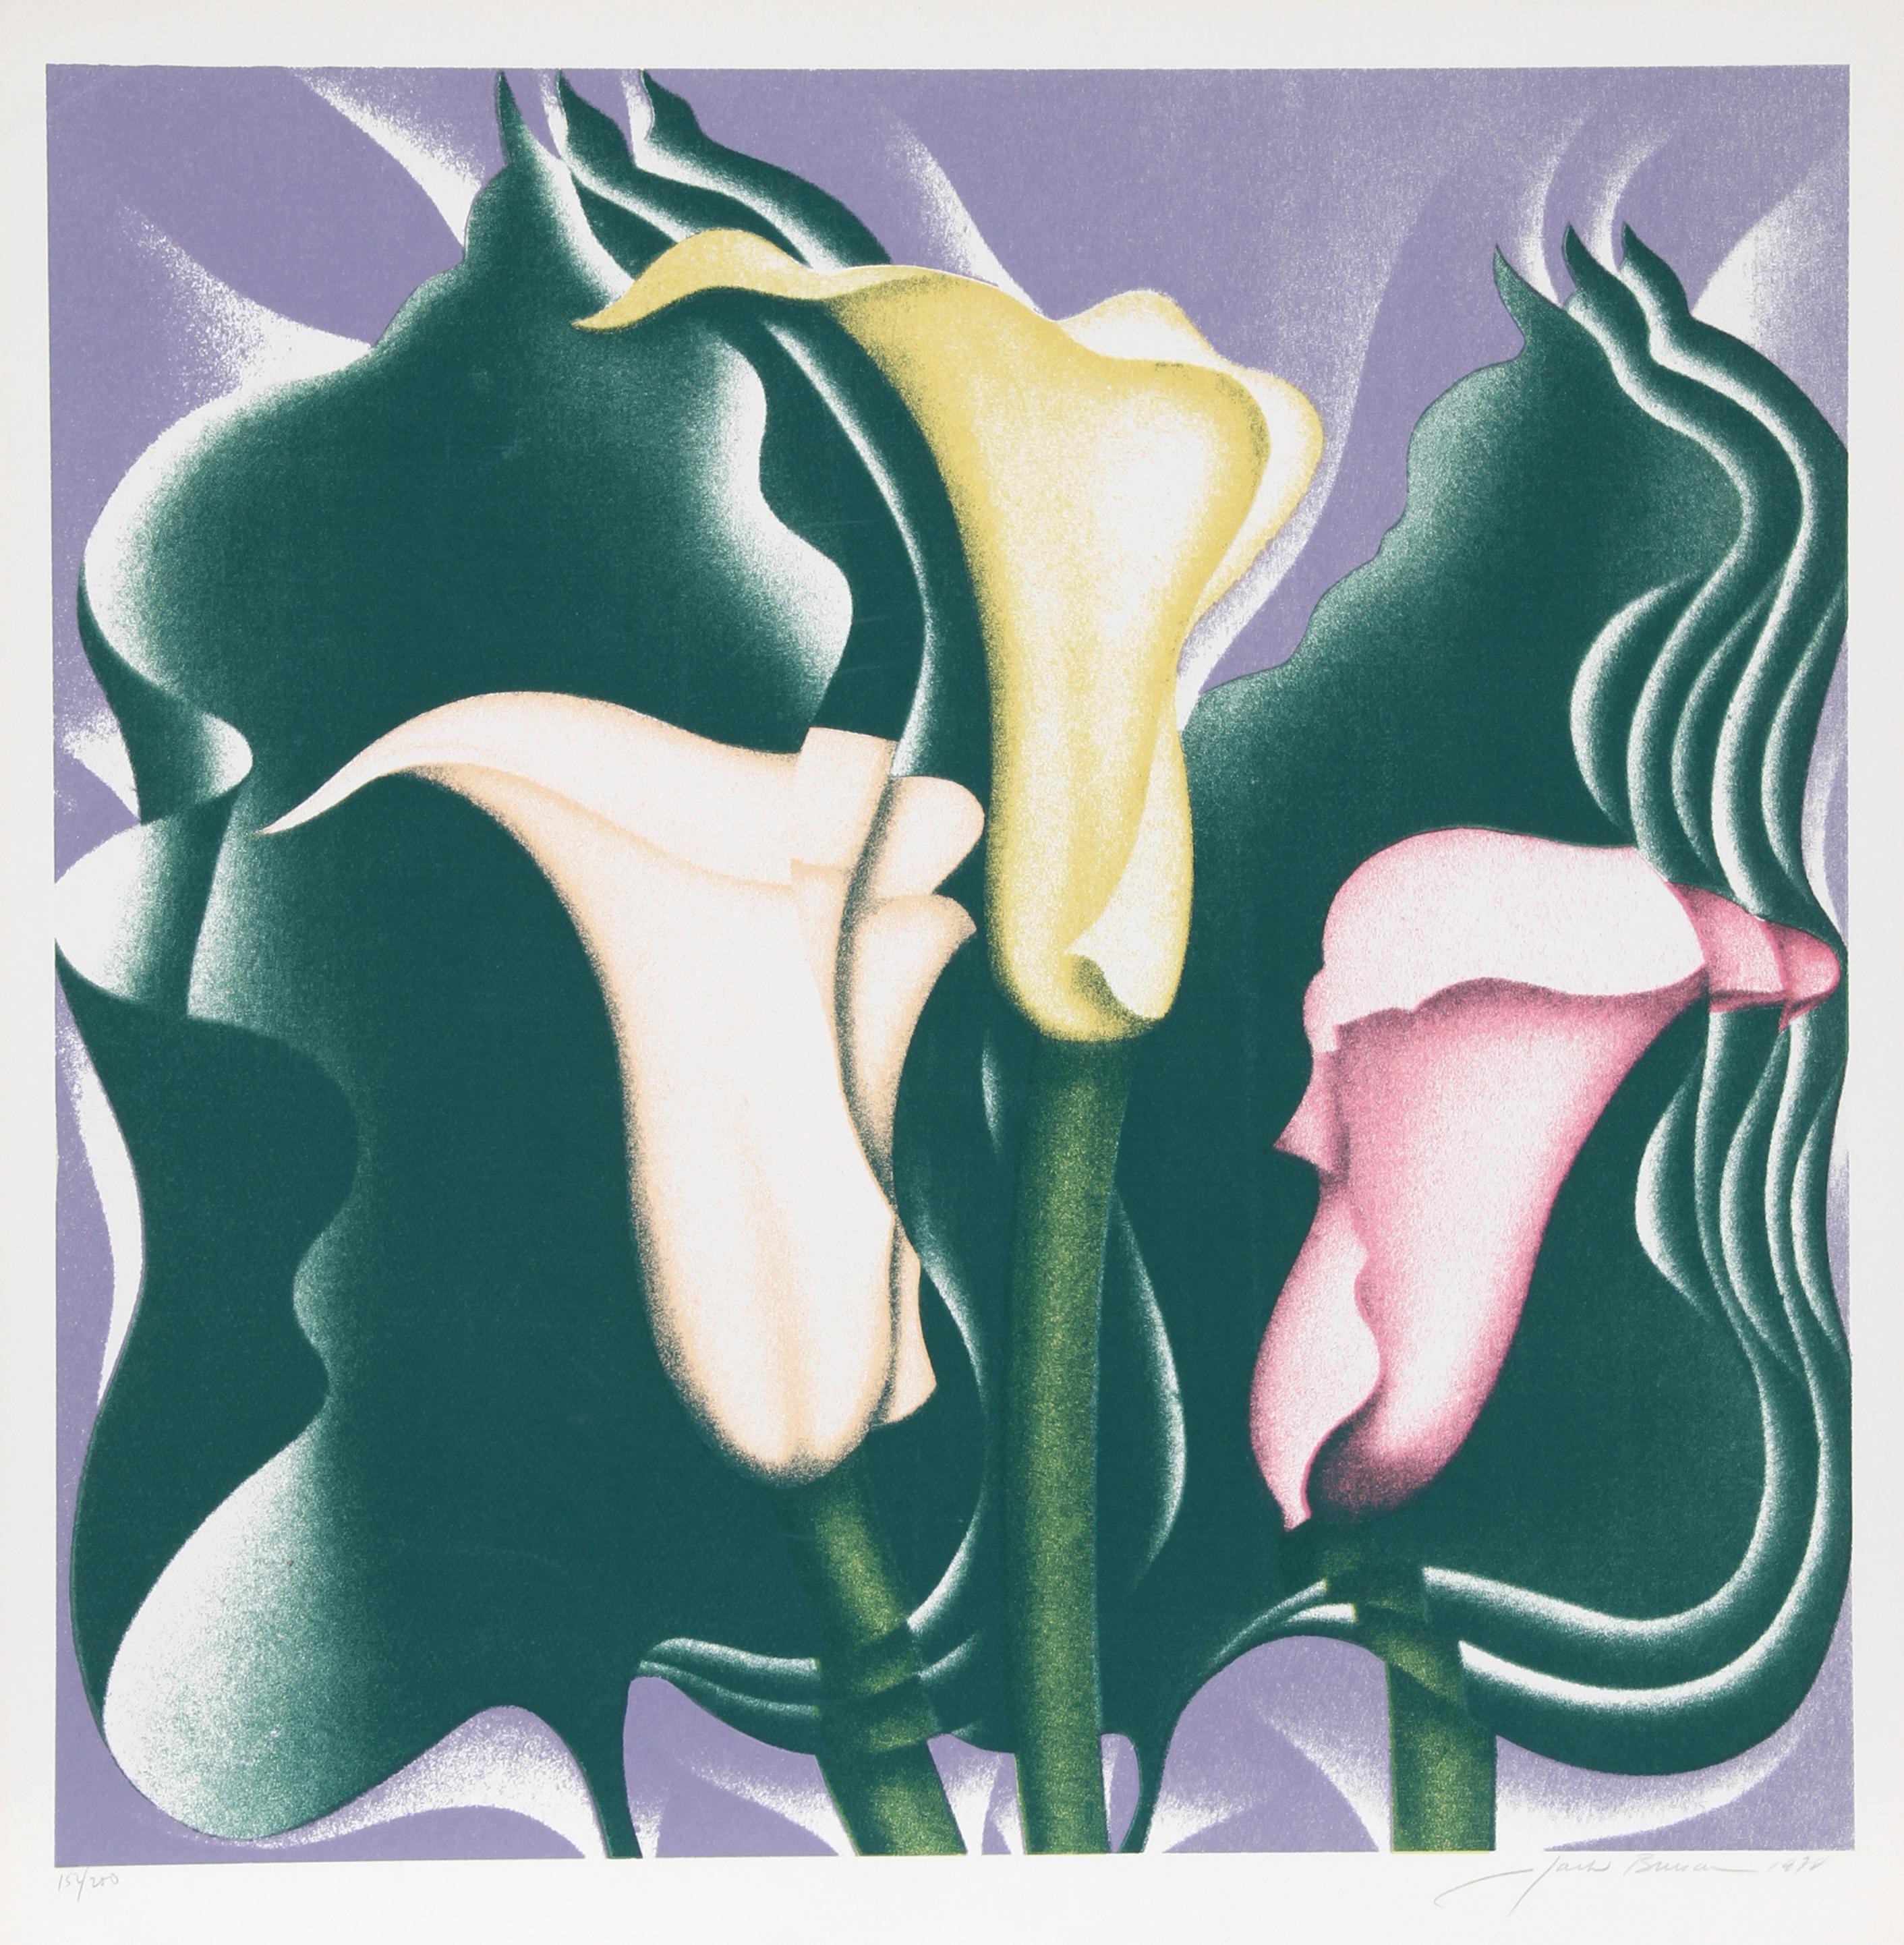 Calla Lily
Jack Brusca, American (1939–1993)
Date: 1978
Screenprint, signed and numbered in pencil
Edition of 200, AP 30
Image Size: 23.5 x 23.5 inches
Size: 26 in. x 25.5 in. (66.04 cm x 64.77 cm)